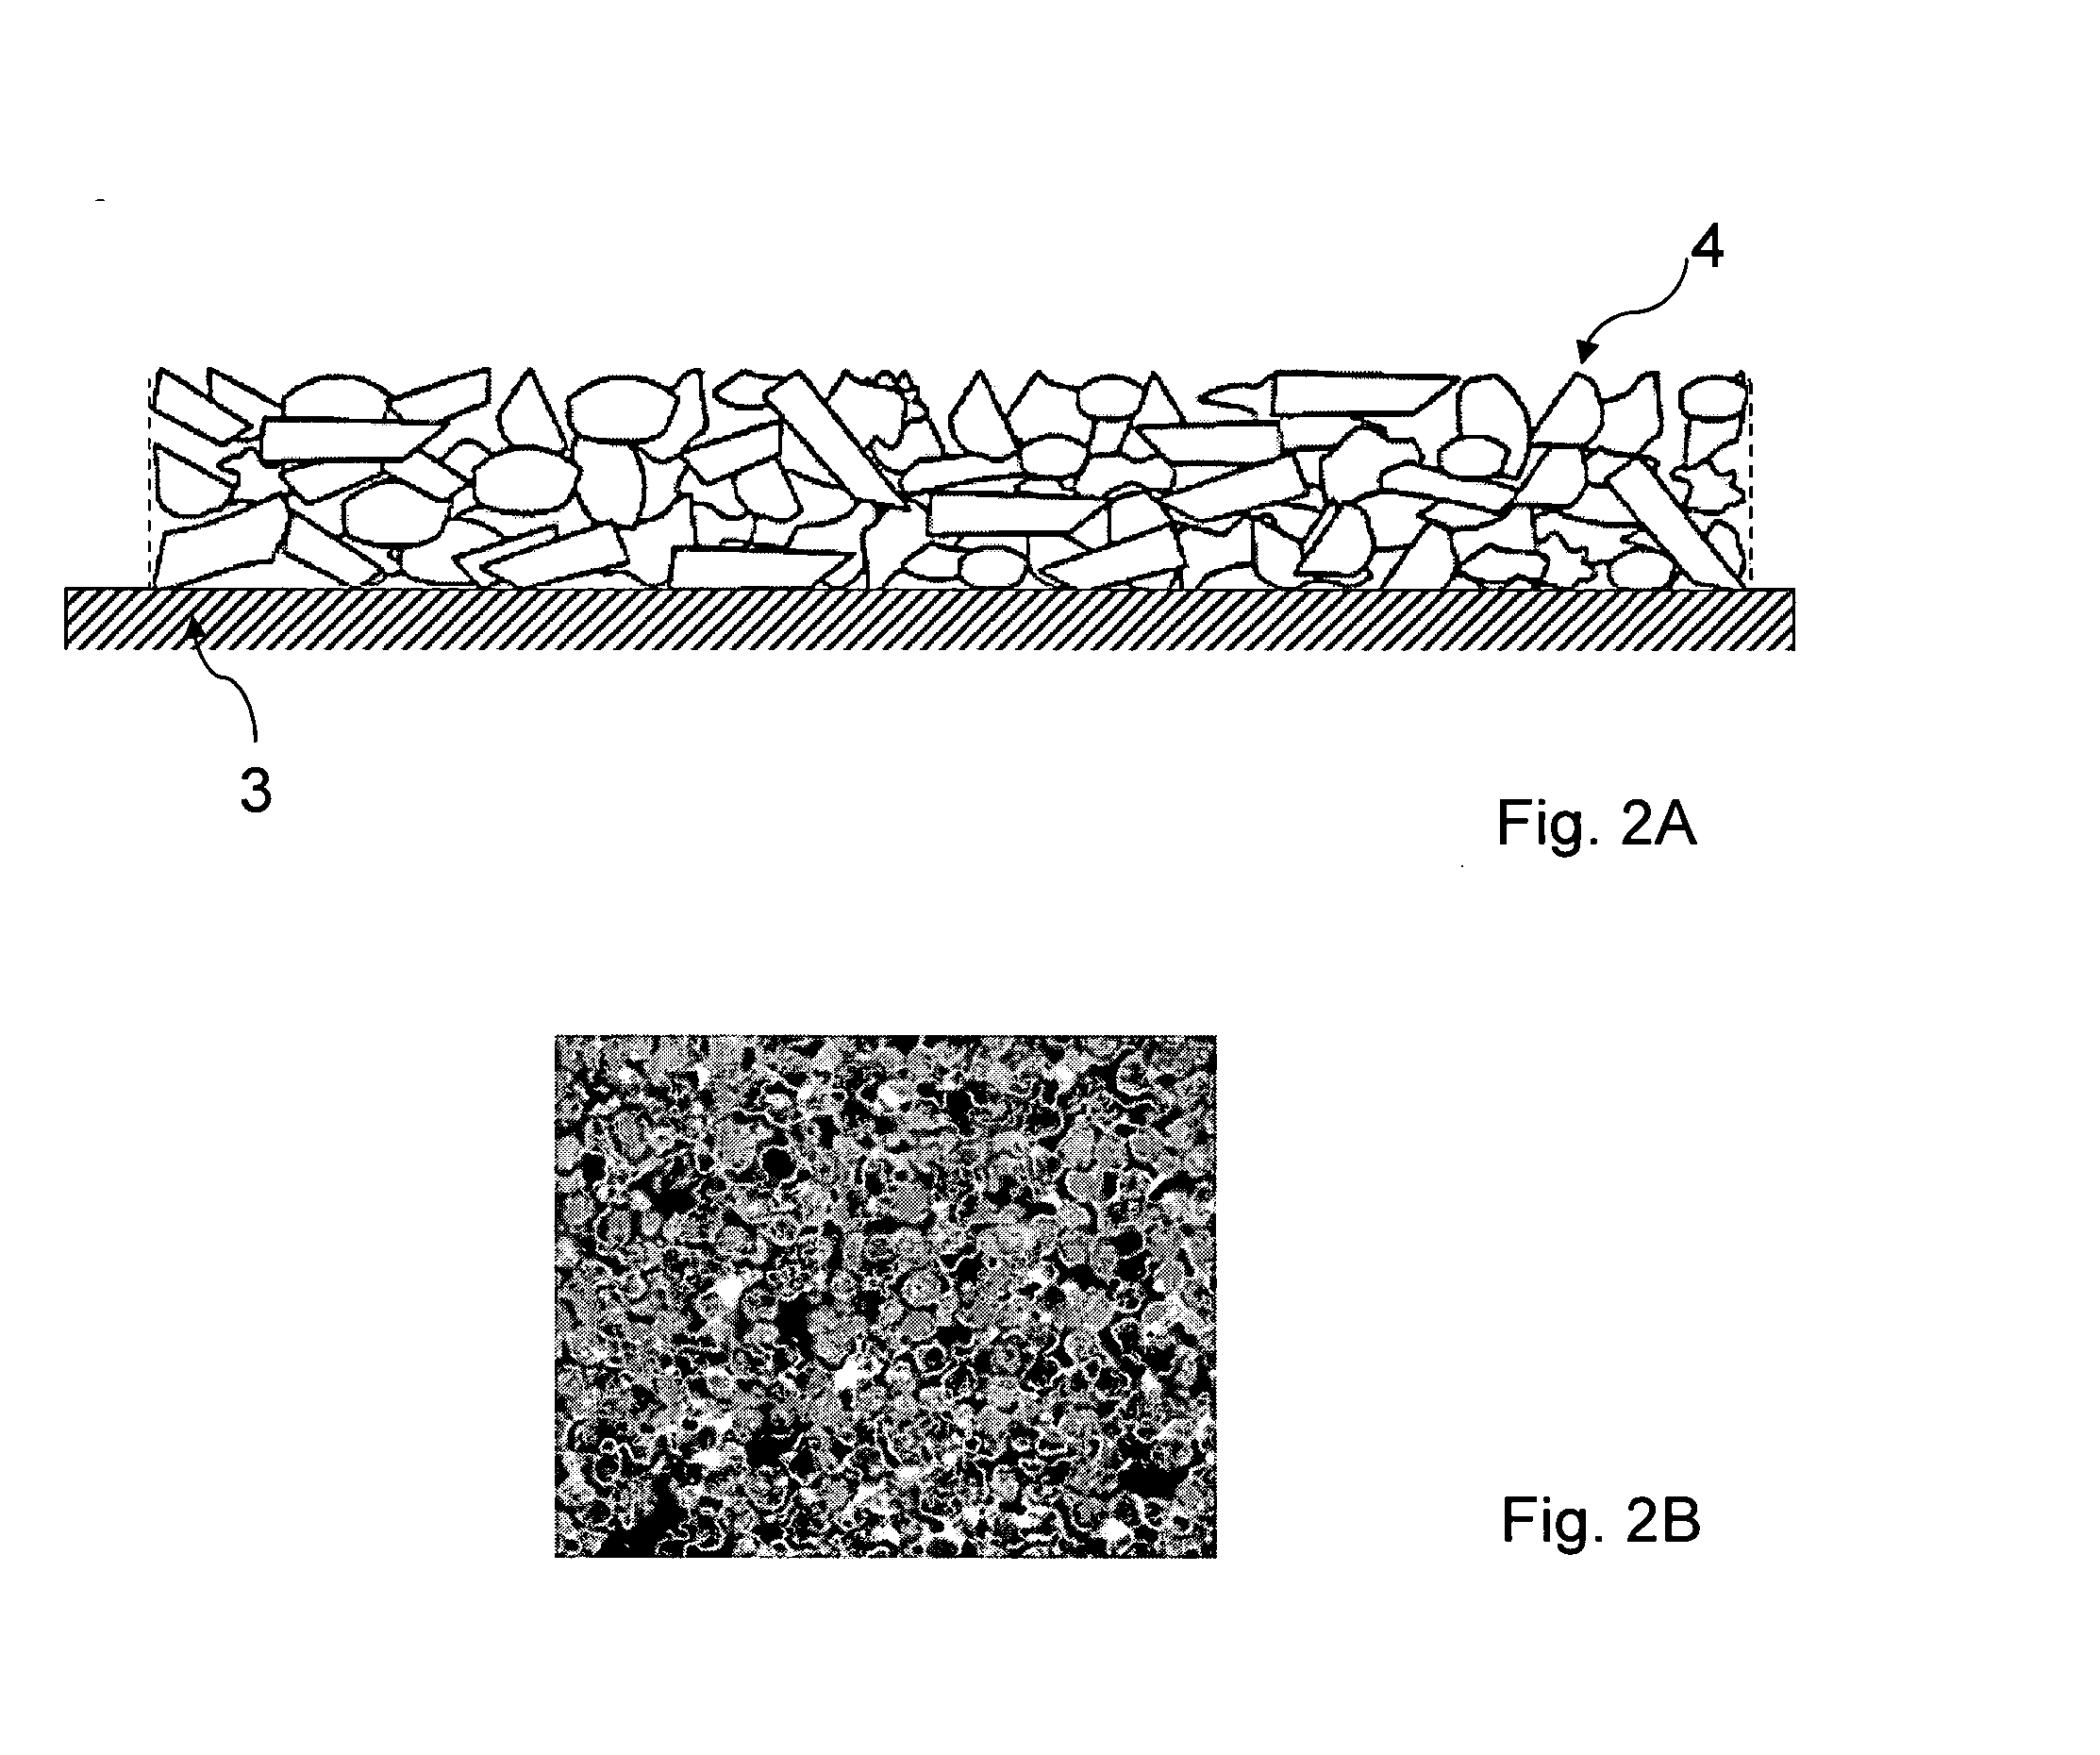 Cooling apparatus with surface enhancement boiling heat transfer